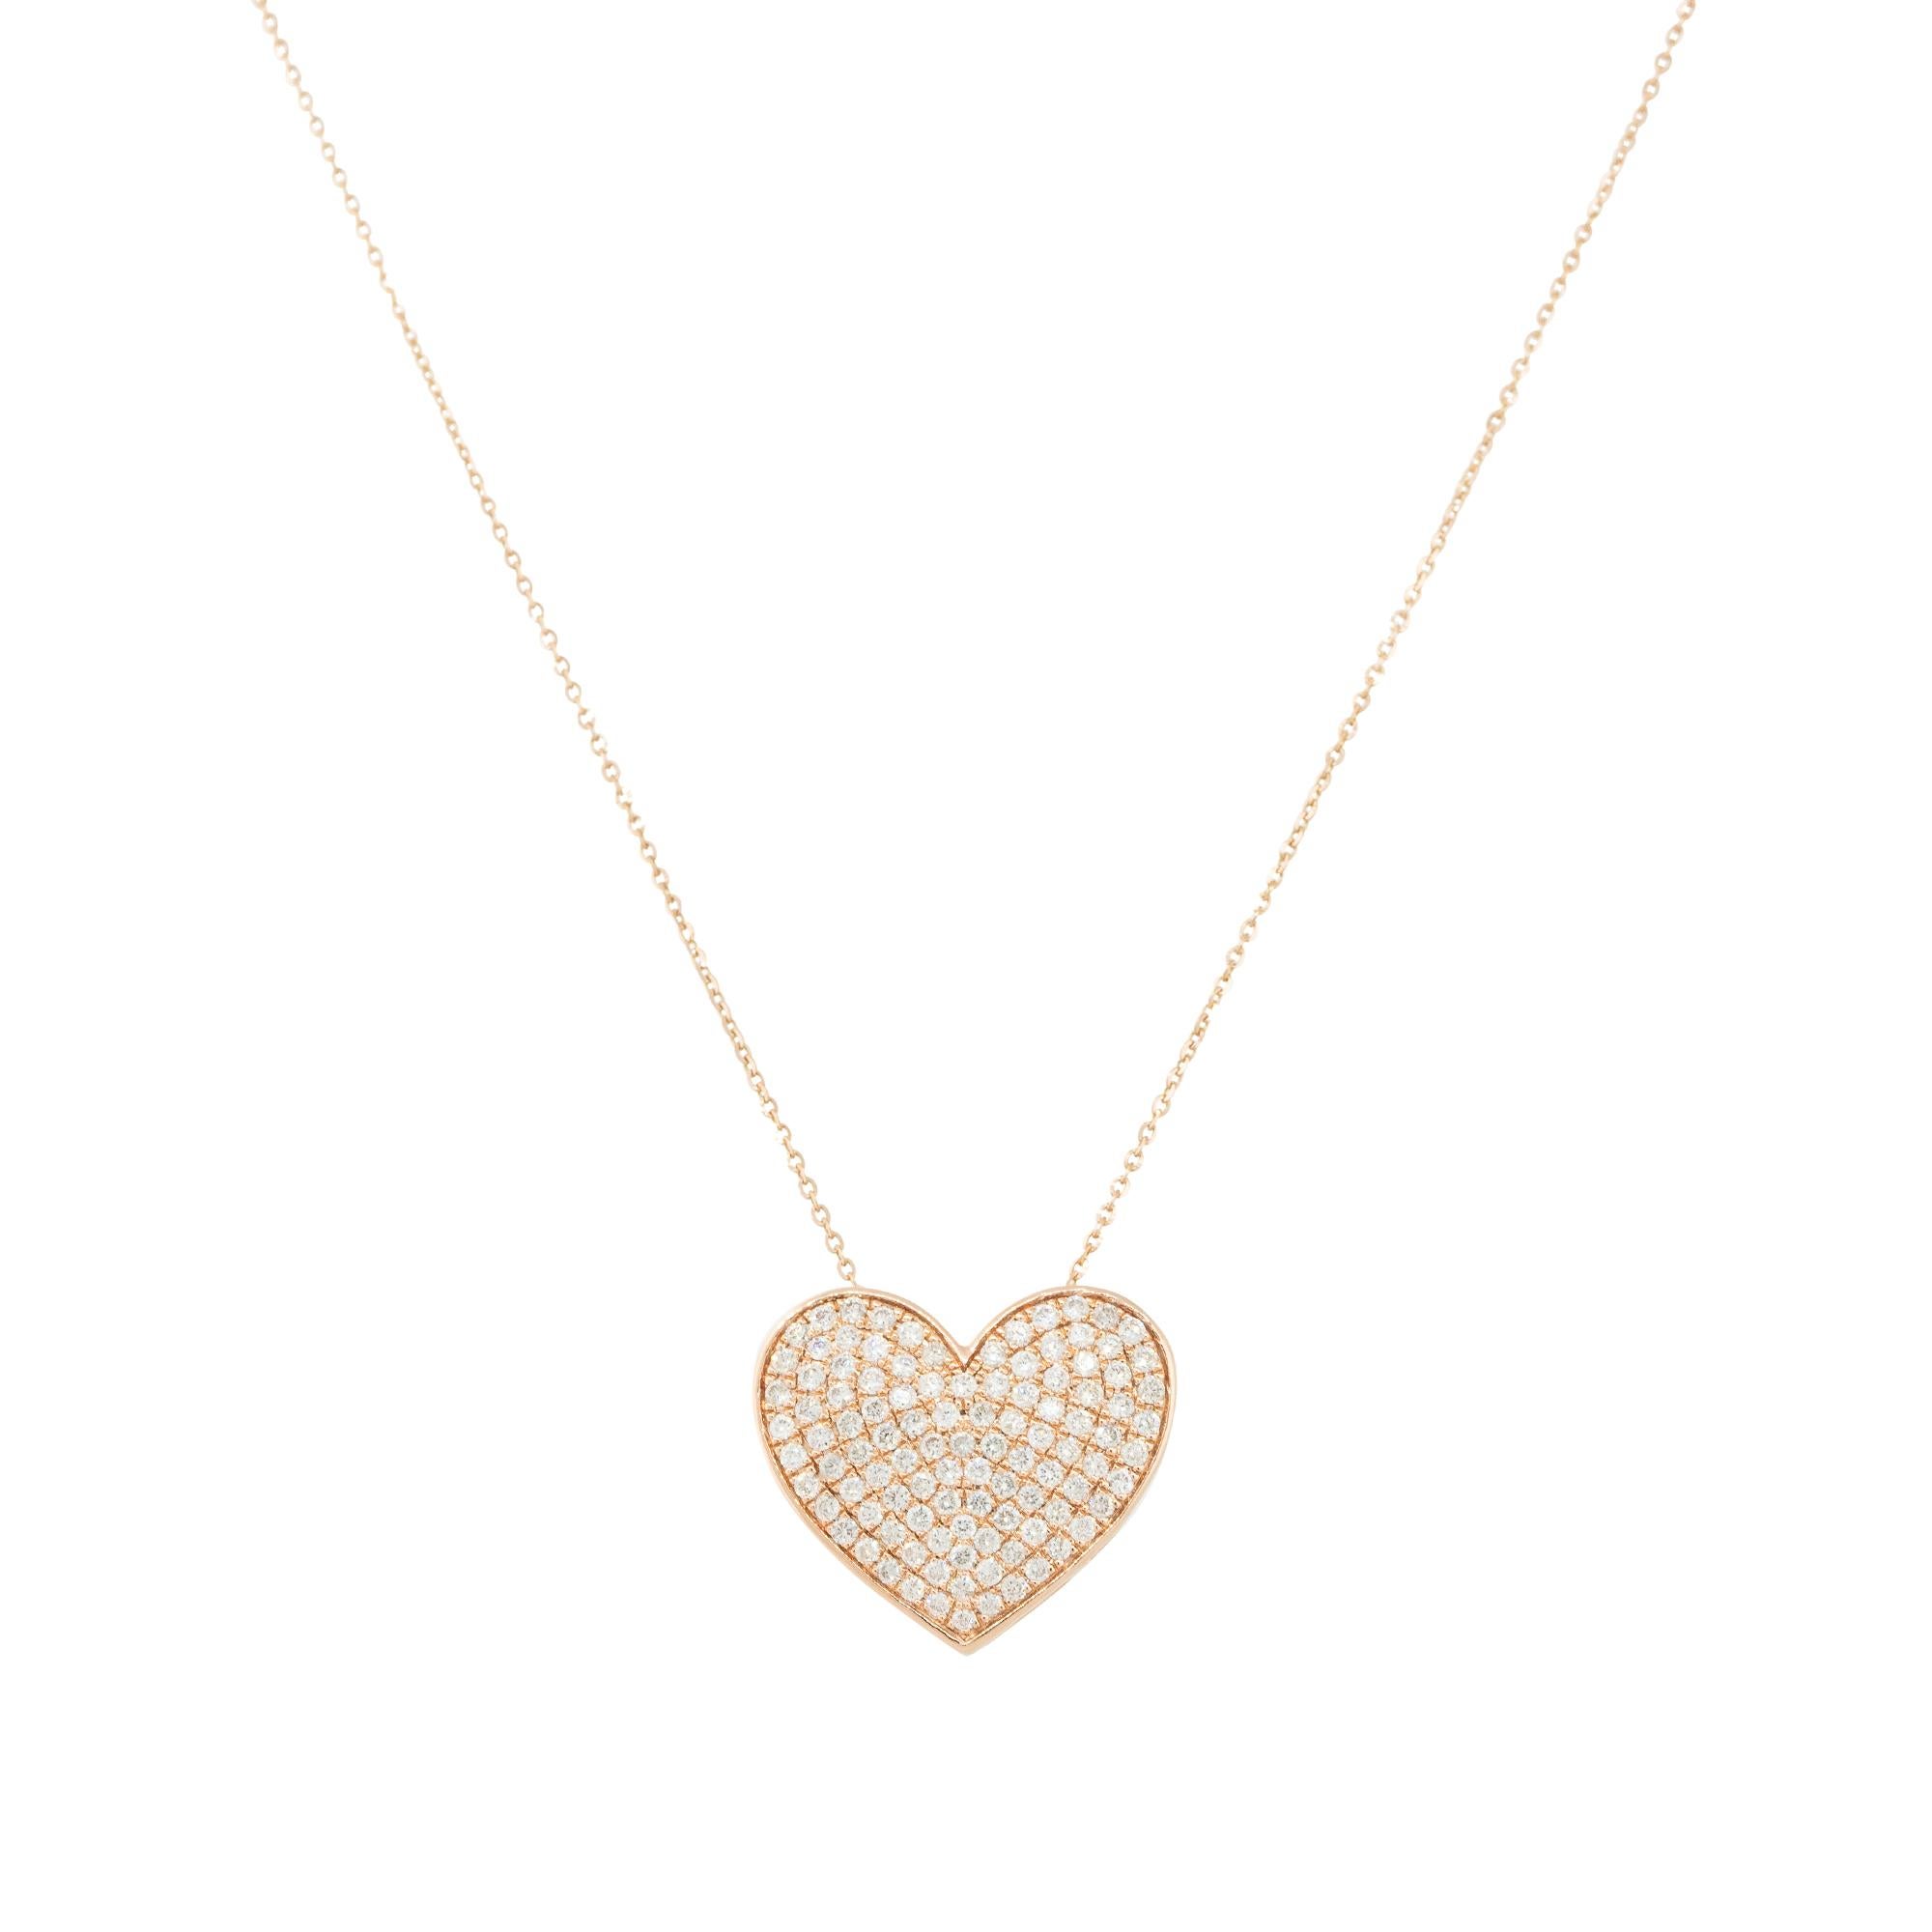 1.01 Carat Pave Diamond Heart Pendant Necklace 14 Karat In Stock In Excellent Condition For Sale In Boca Raton, FL